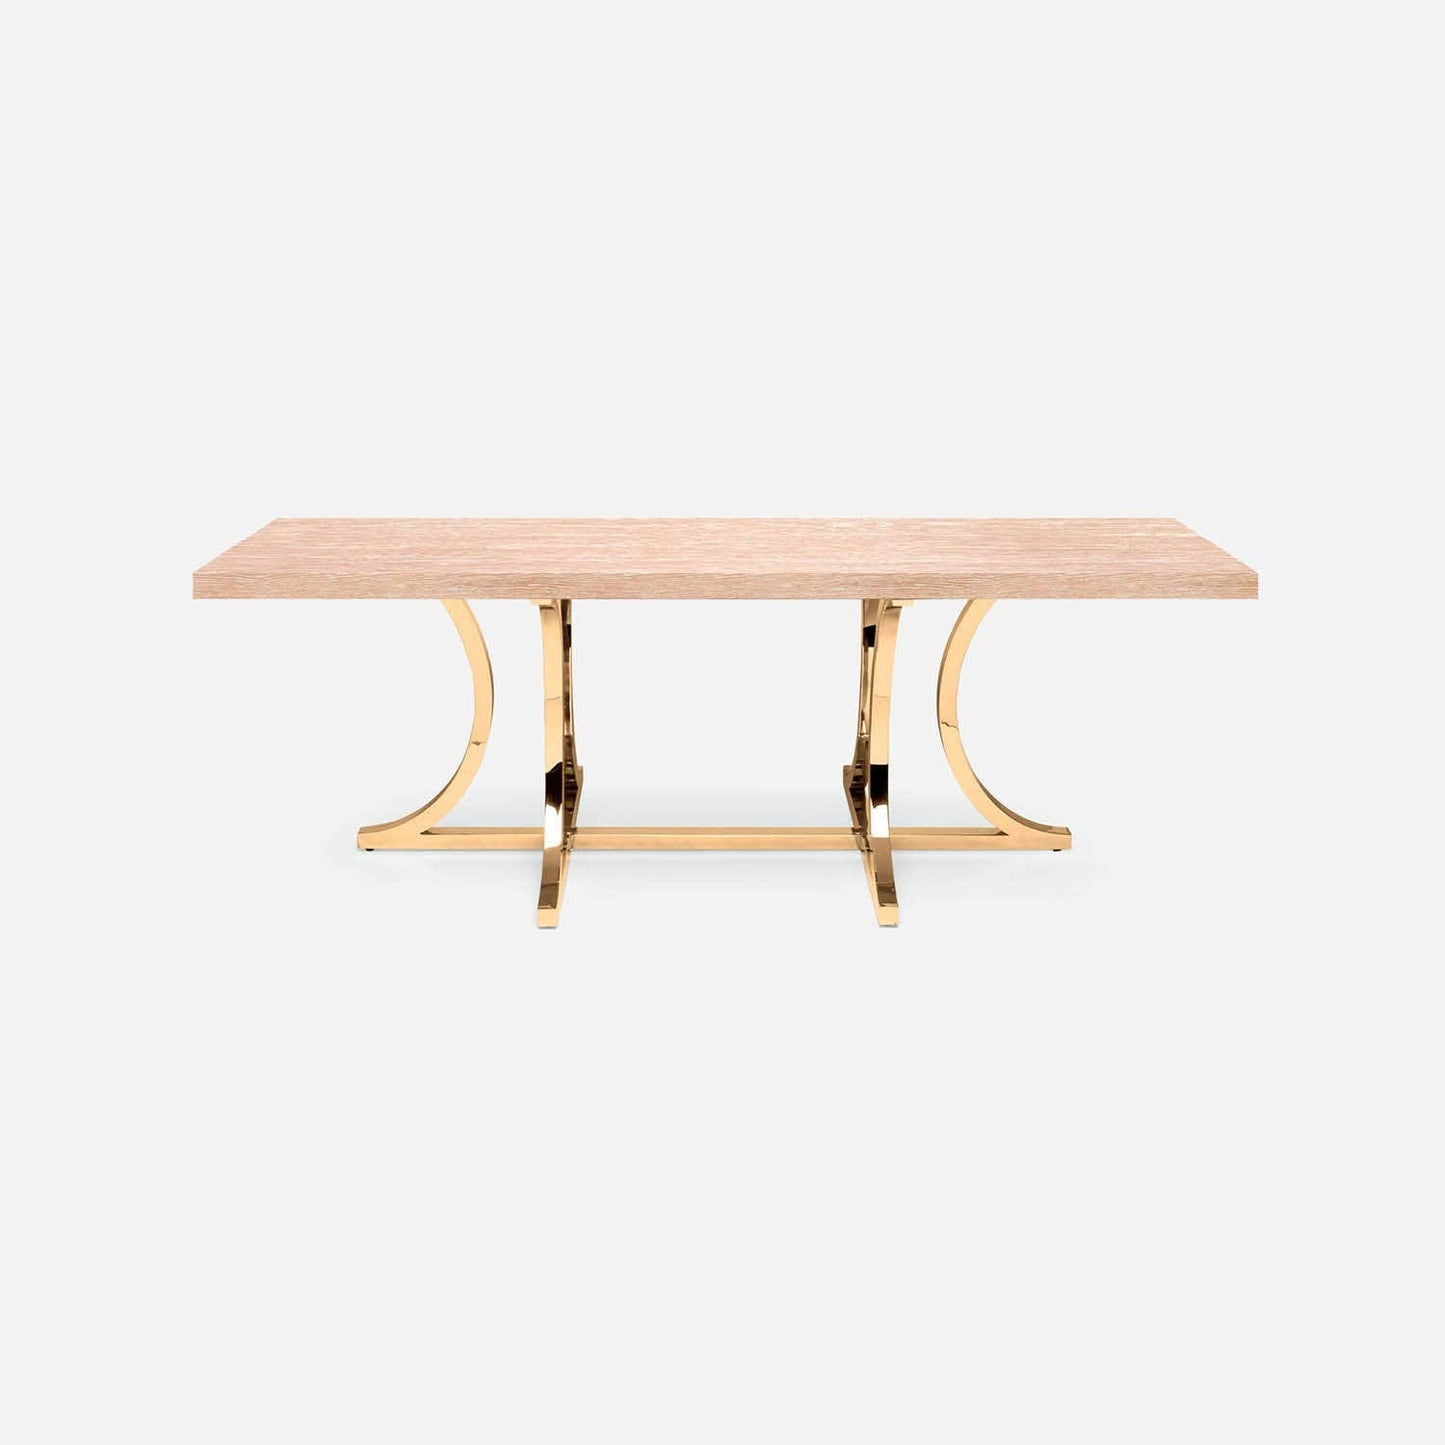 Made Goods Leighton 110" x 40" x 30" Polished Brass Steel Dinning Table With Rectangle Zinc Metal Table Top